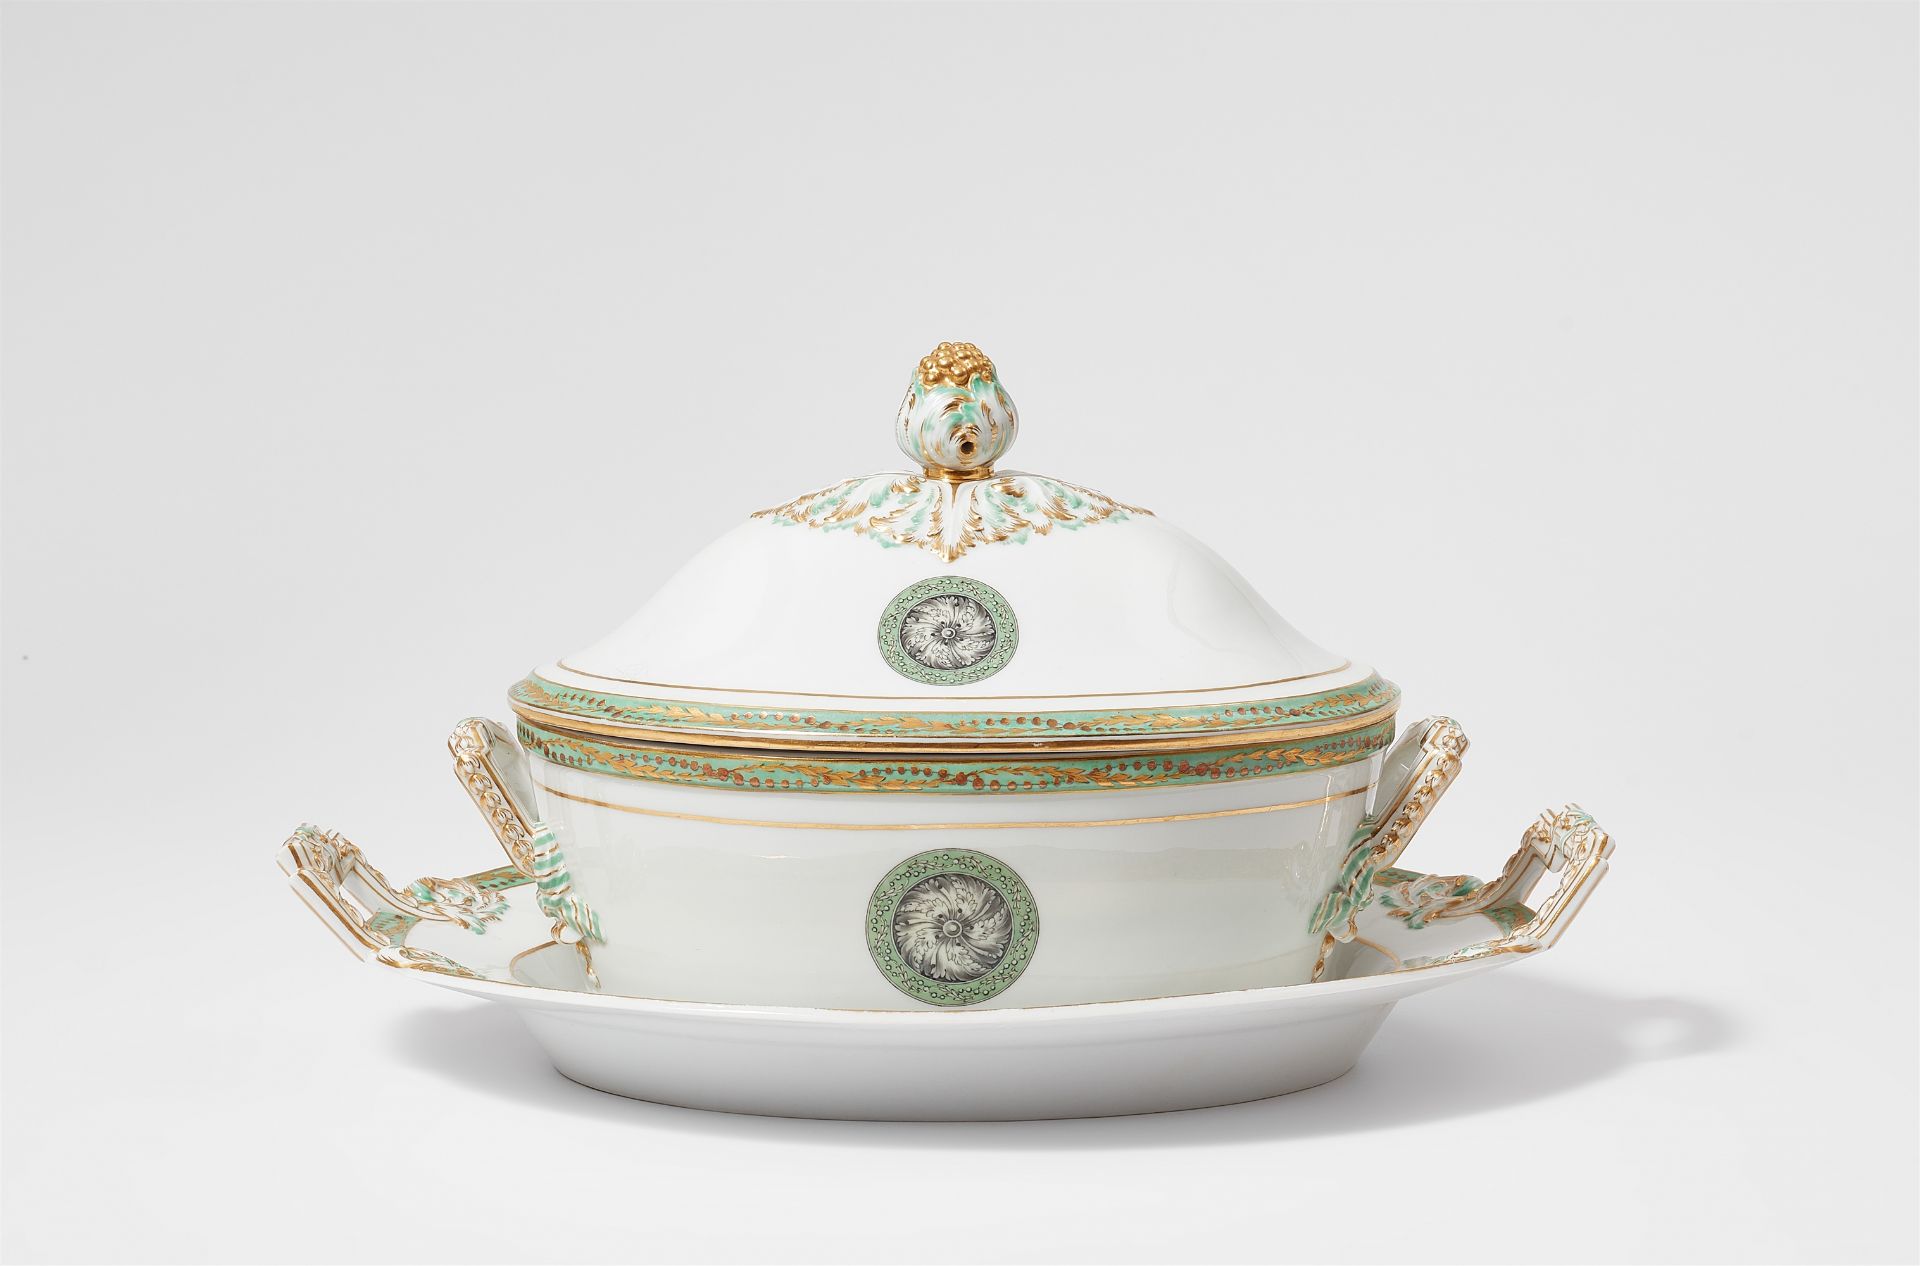 A Berlin KPM porcelain tureen and stand, presumably from the dinner service for Count Galen